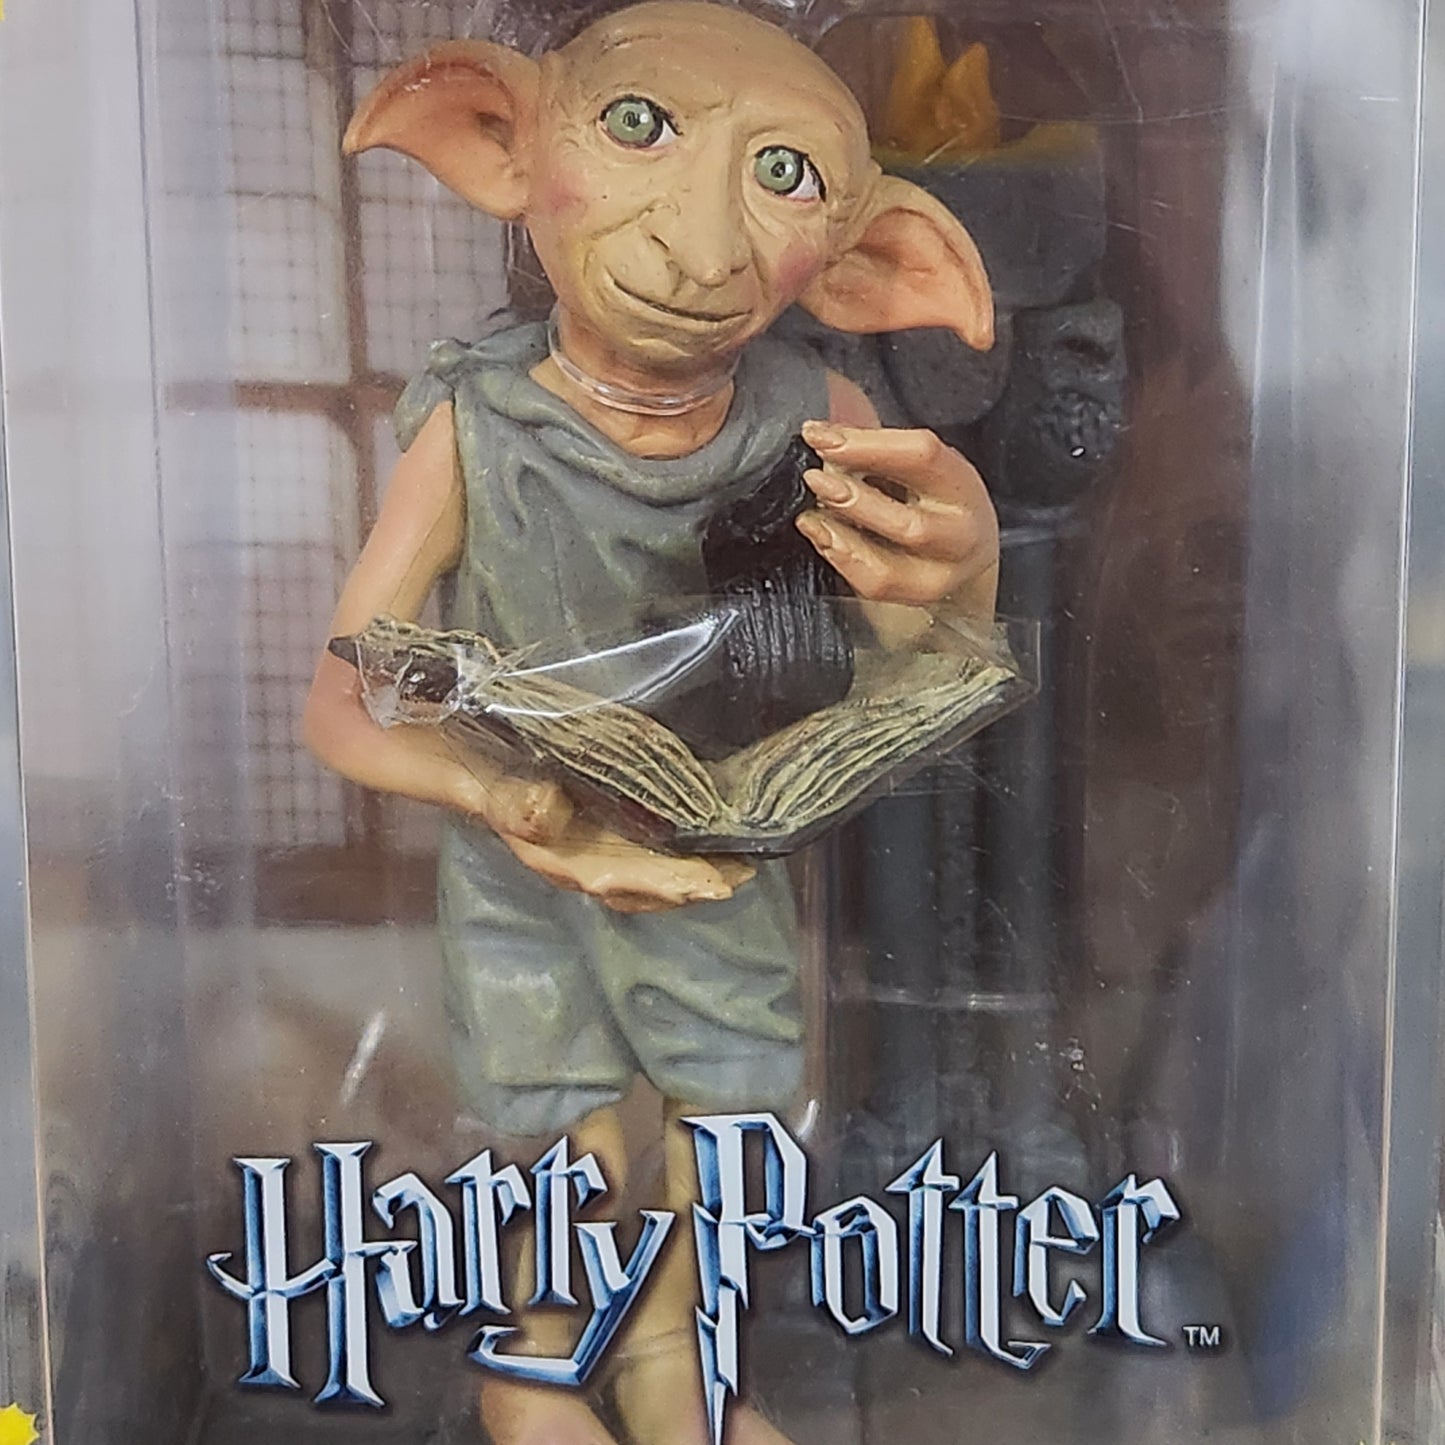 Figurine Harry Potter Doby Magical Creatures 18.5 cm